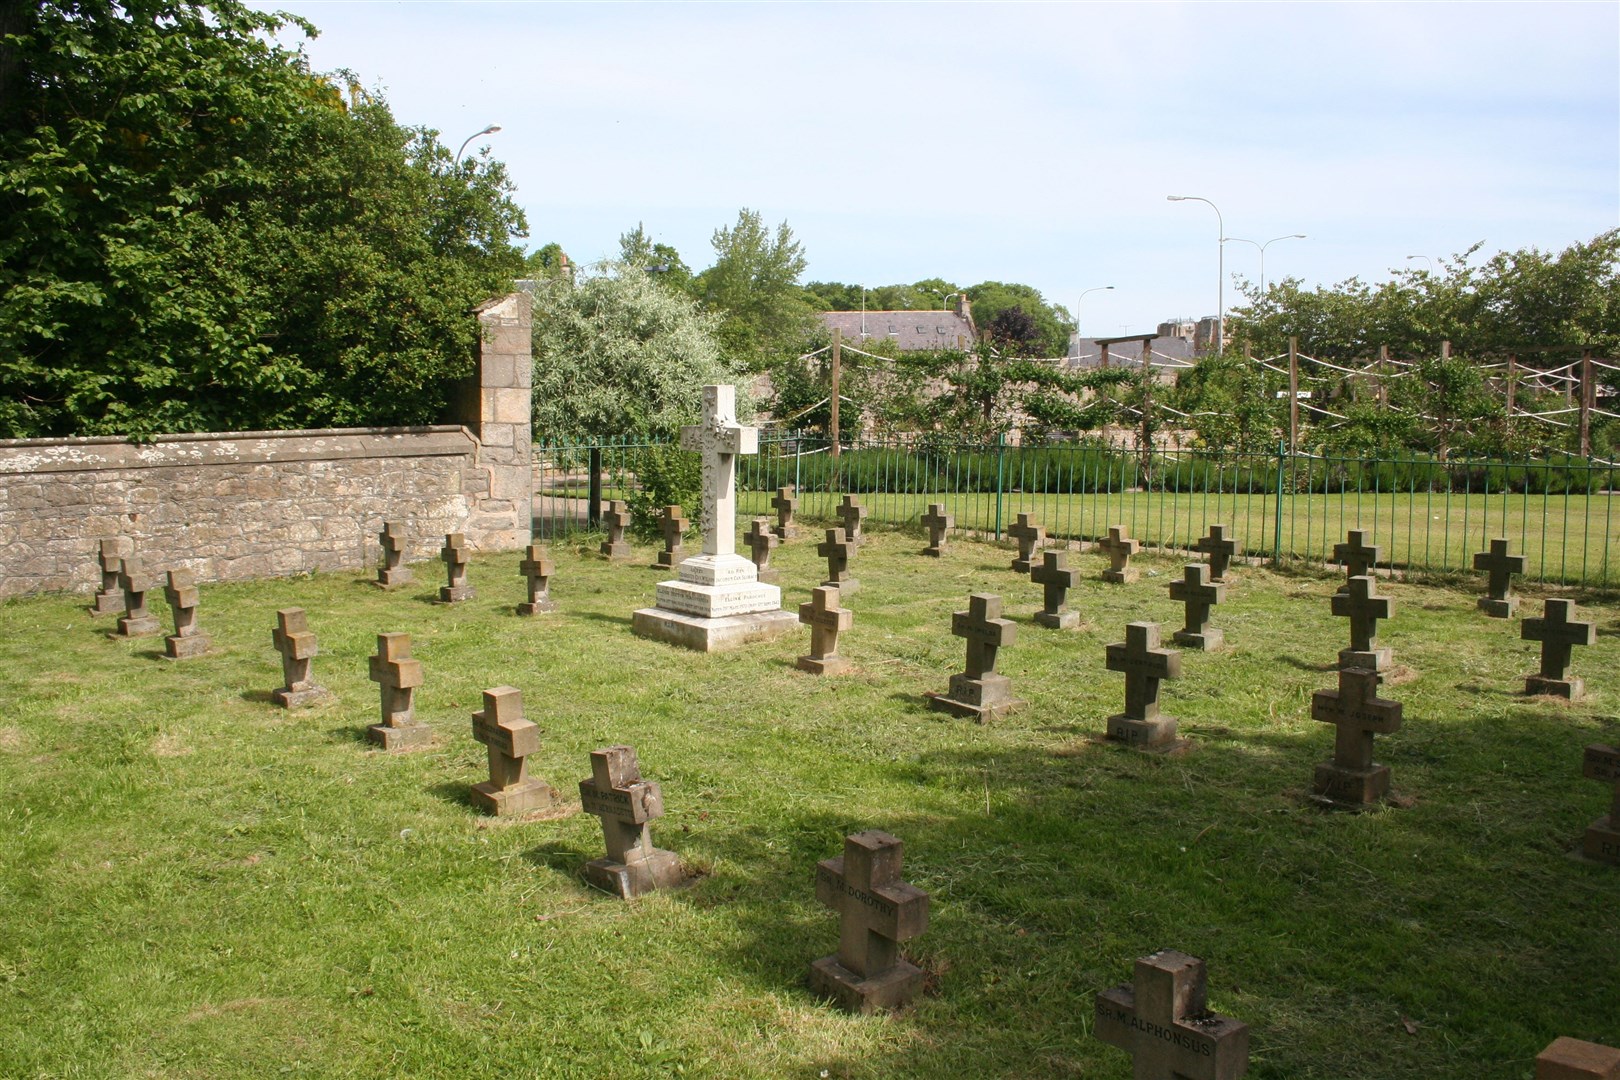 The graveyard next to the Rose Garden at Greyfriars Convent in Elgin. Photograph by Anne Burgess/geograph.org.uk.